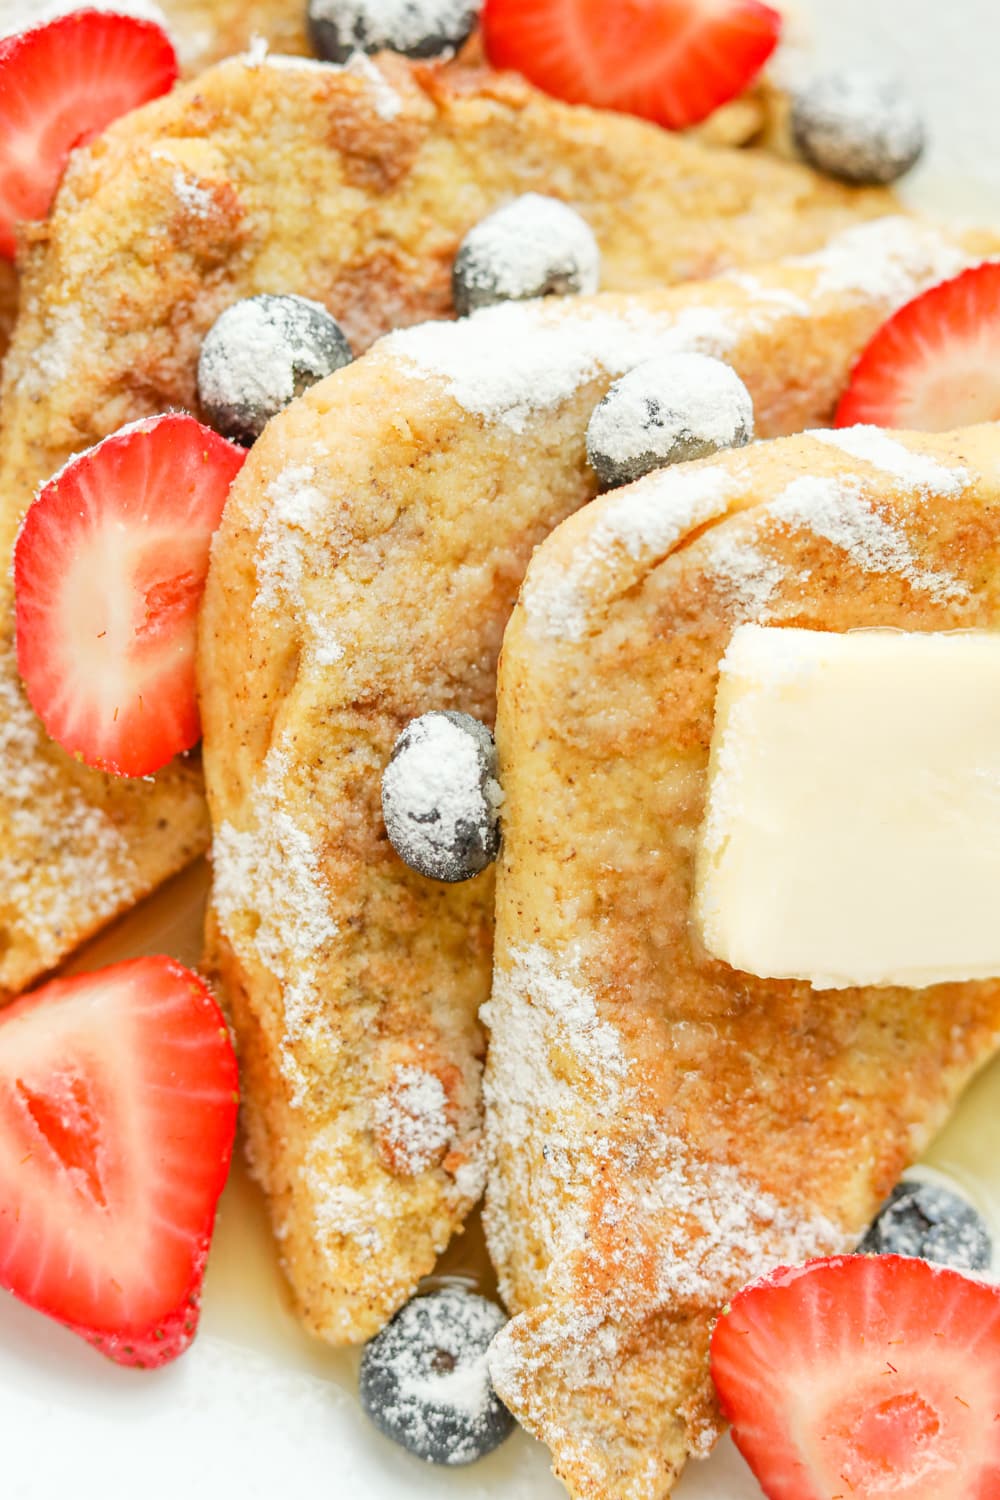 French Toast topped with berries and confectioners Swerve.